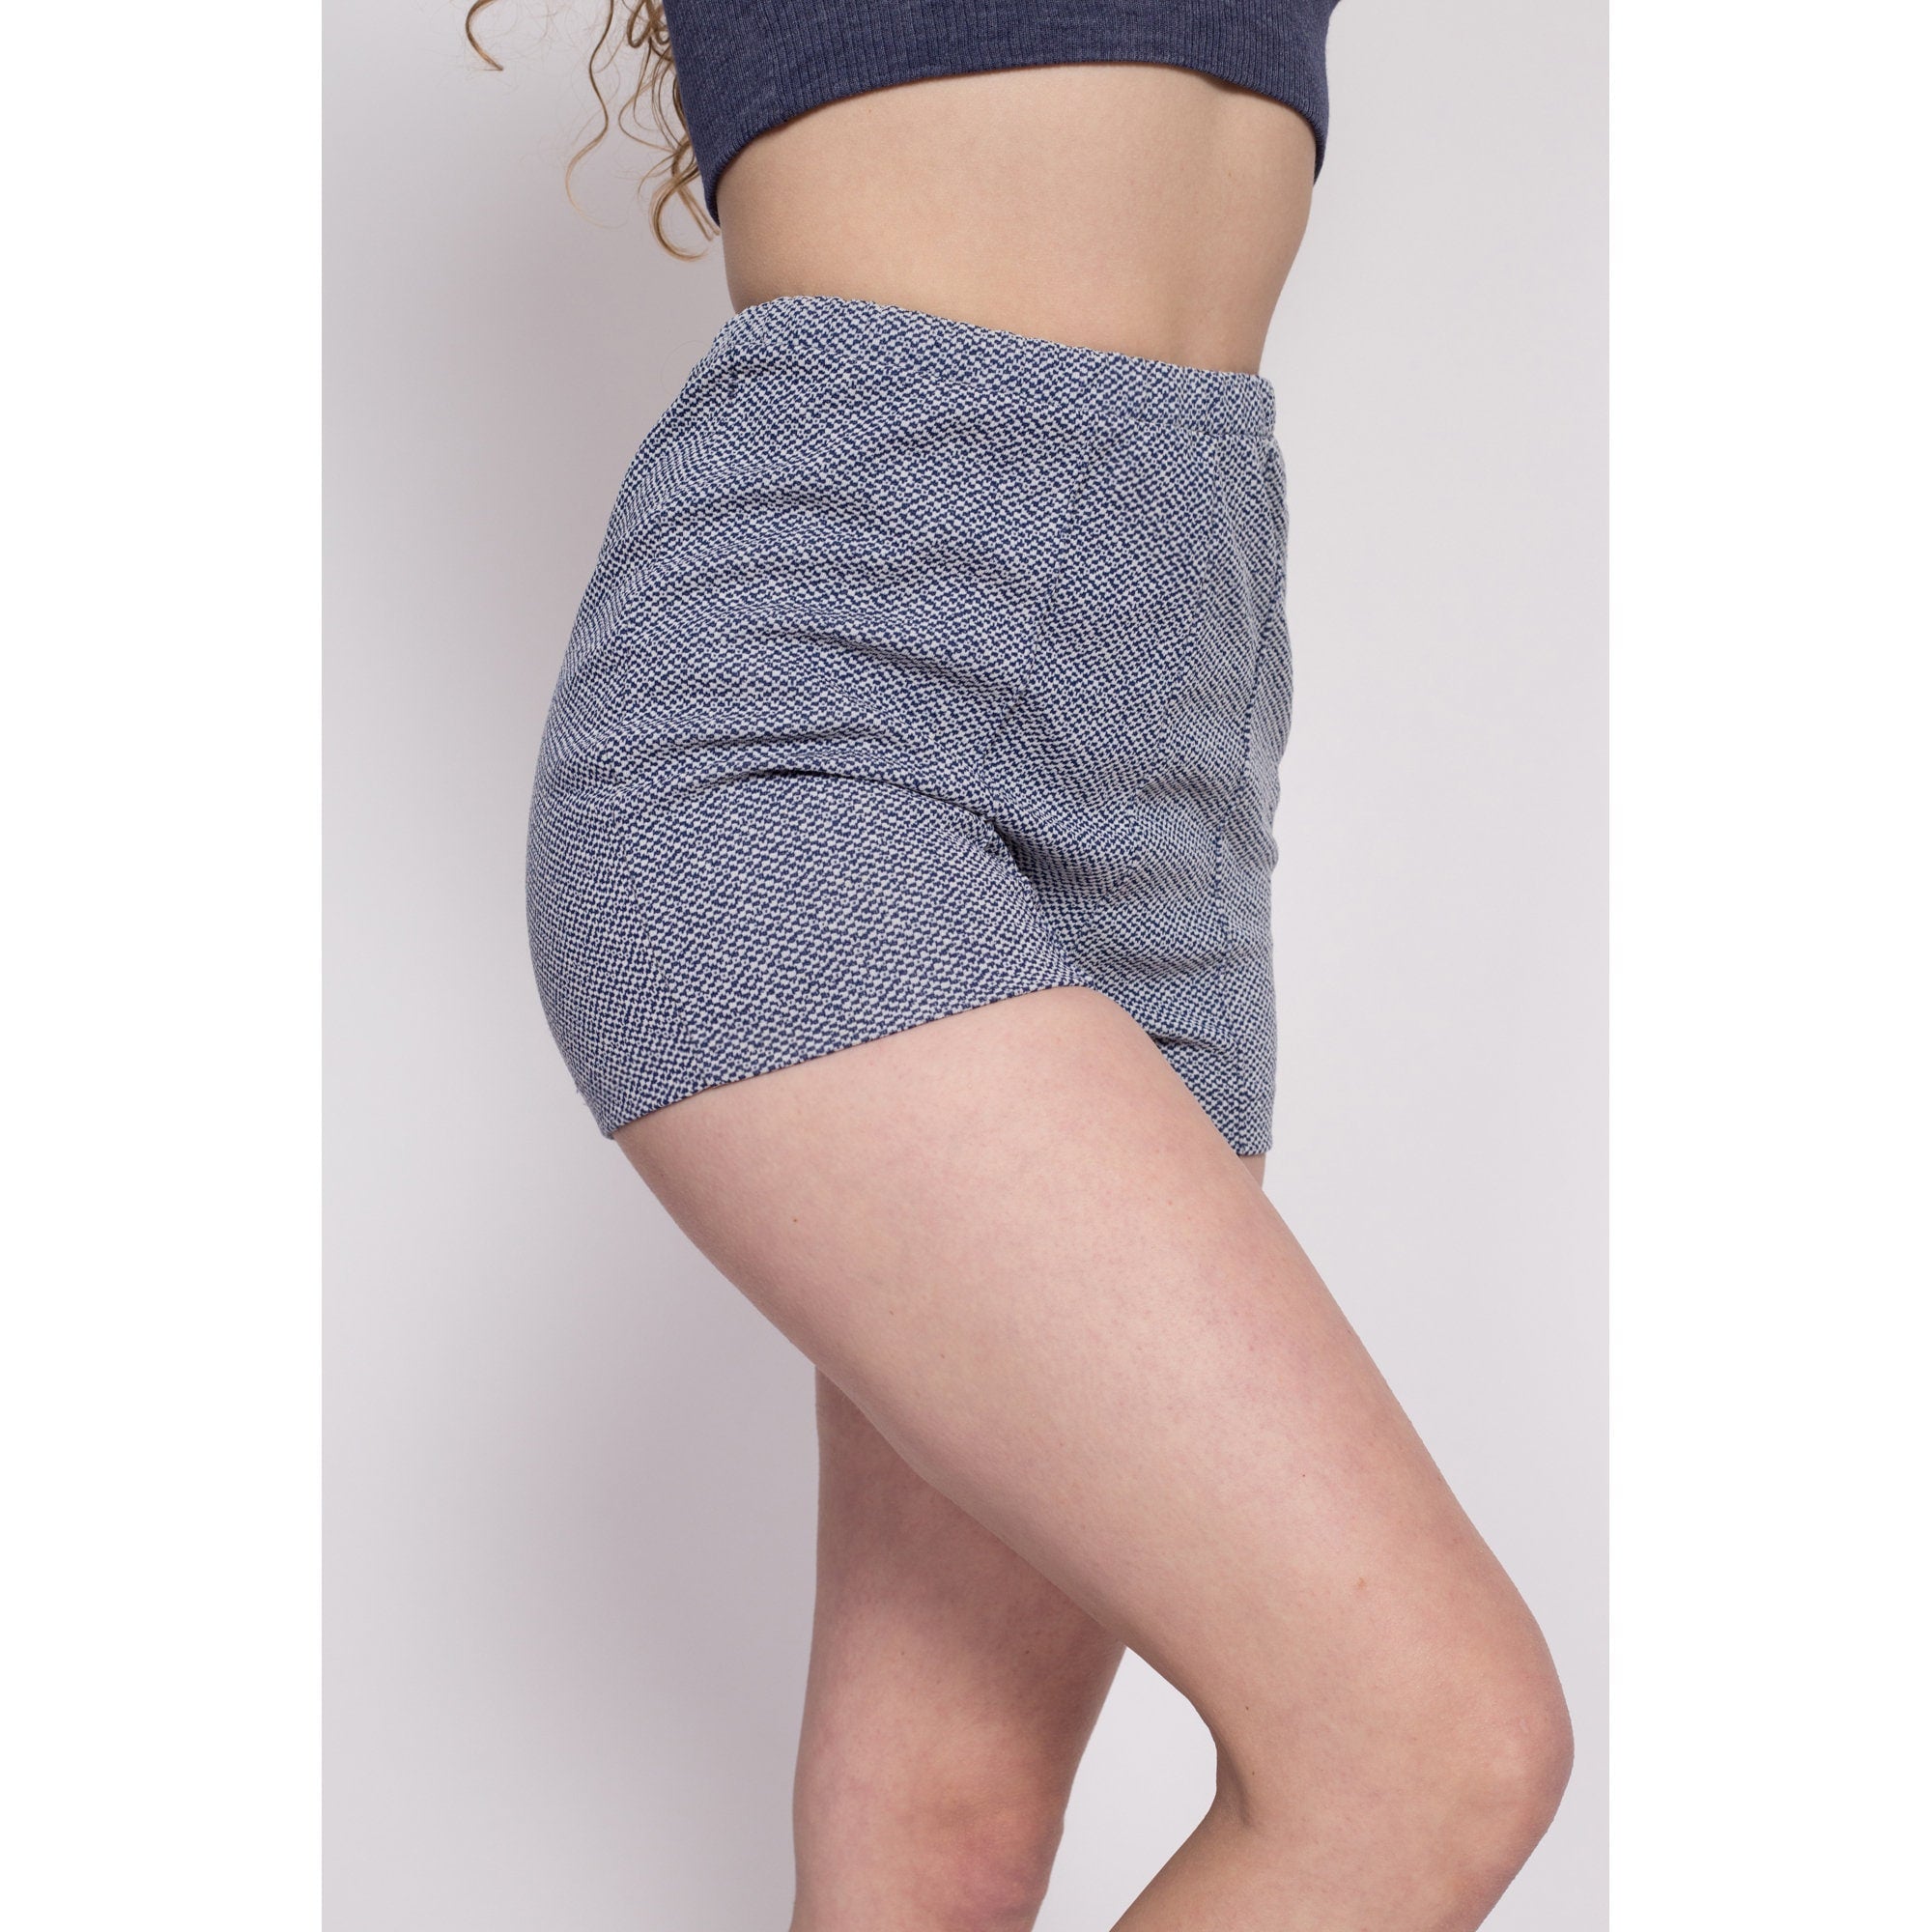 How to Sew High Waisted Festival Hot Pants | FASHION DIY | Now thats Peachy